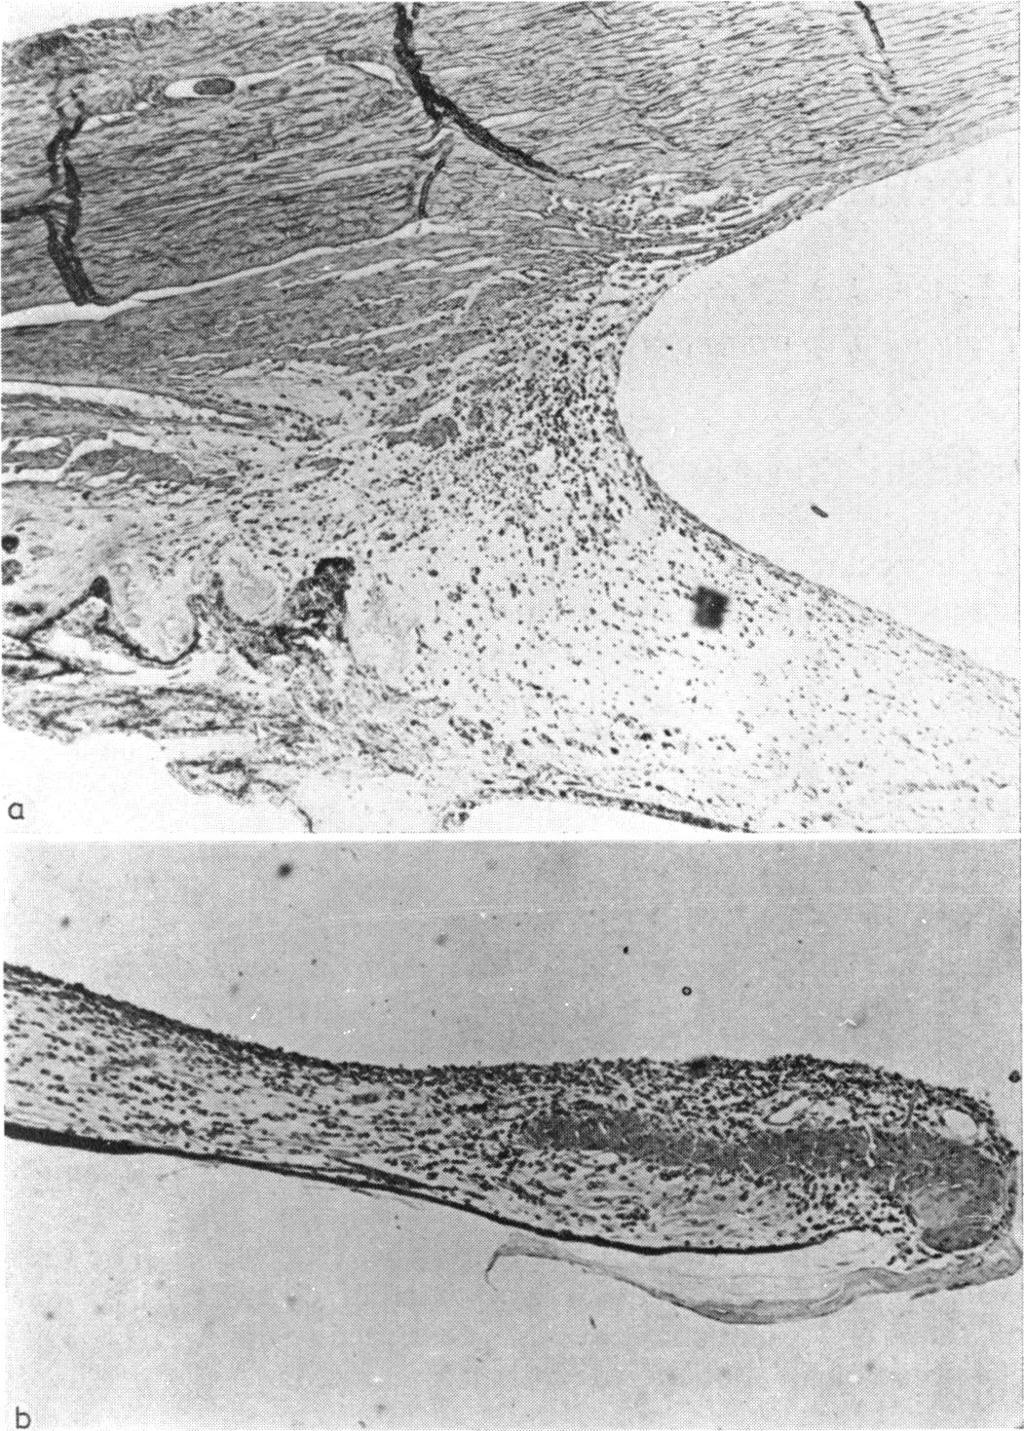 F-v ;-- 8ti'4.A ; t Vascular changes in the iris in chronic anterior uveitis w:f Fig. 7 Case 6, left eye. Sections from chamber angle (a) and central part of the iris (b).